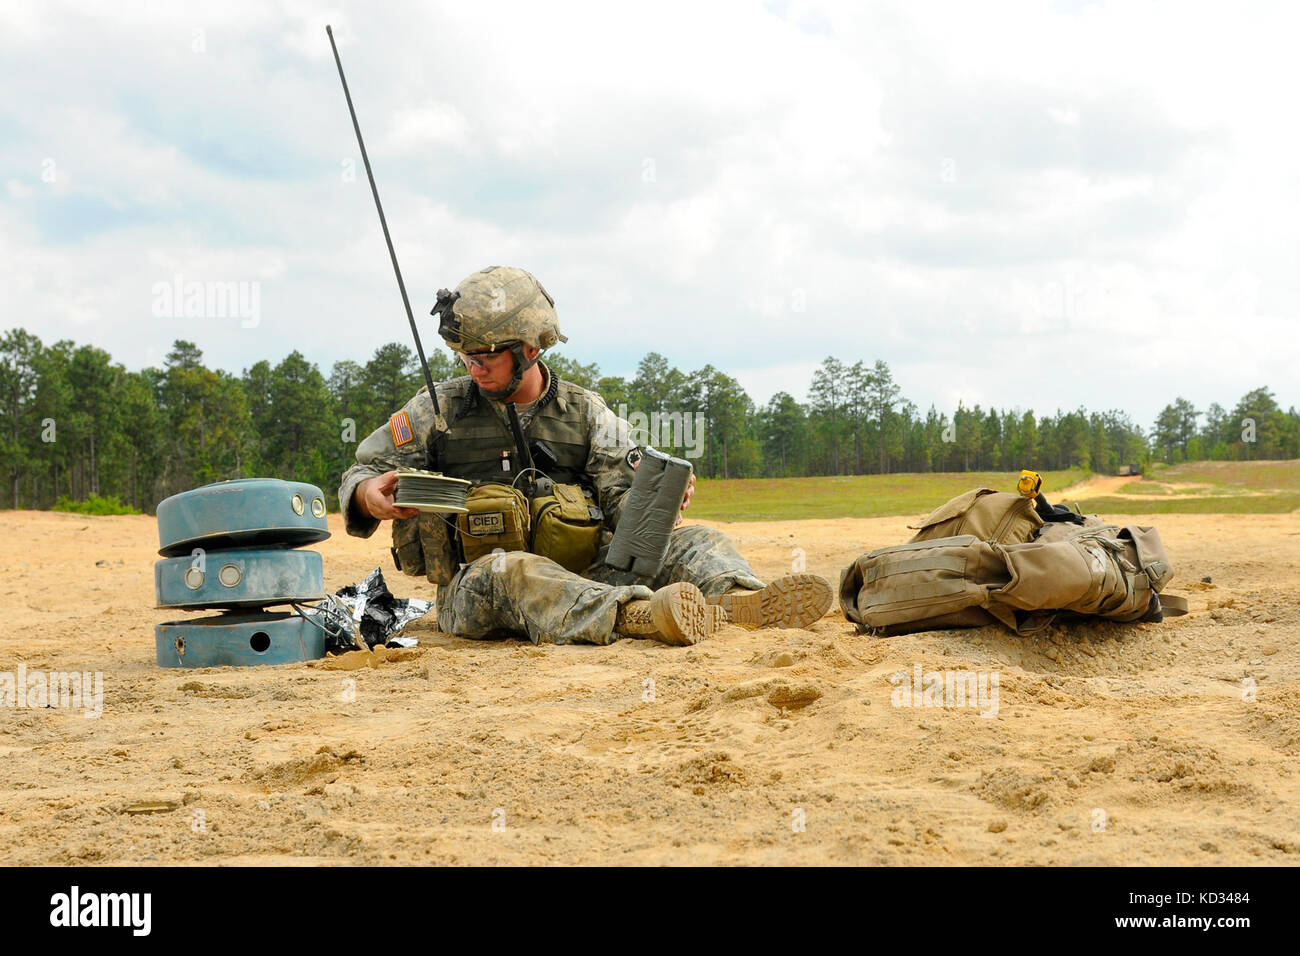 U.S. Army Staff Sgt. Andrew Brazell, assigned to 1221st Route Clearance Company, South Carolina Army National Guard, prepares C-4 explosives to detonate improvised explosive devices during a route clearance training scenario at McCrady Training Center, Eastover, S.C., June 24, 2014.  Brazell’s mission is to locate command wires to IED’s and provide security in case of an attack. (U.S. Air National Guard photo by Tech. Sgt. Jorge Intriago/Released) Stock Photo